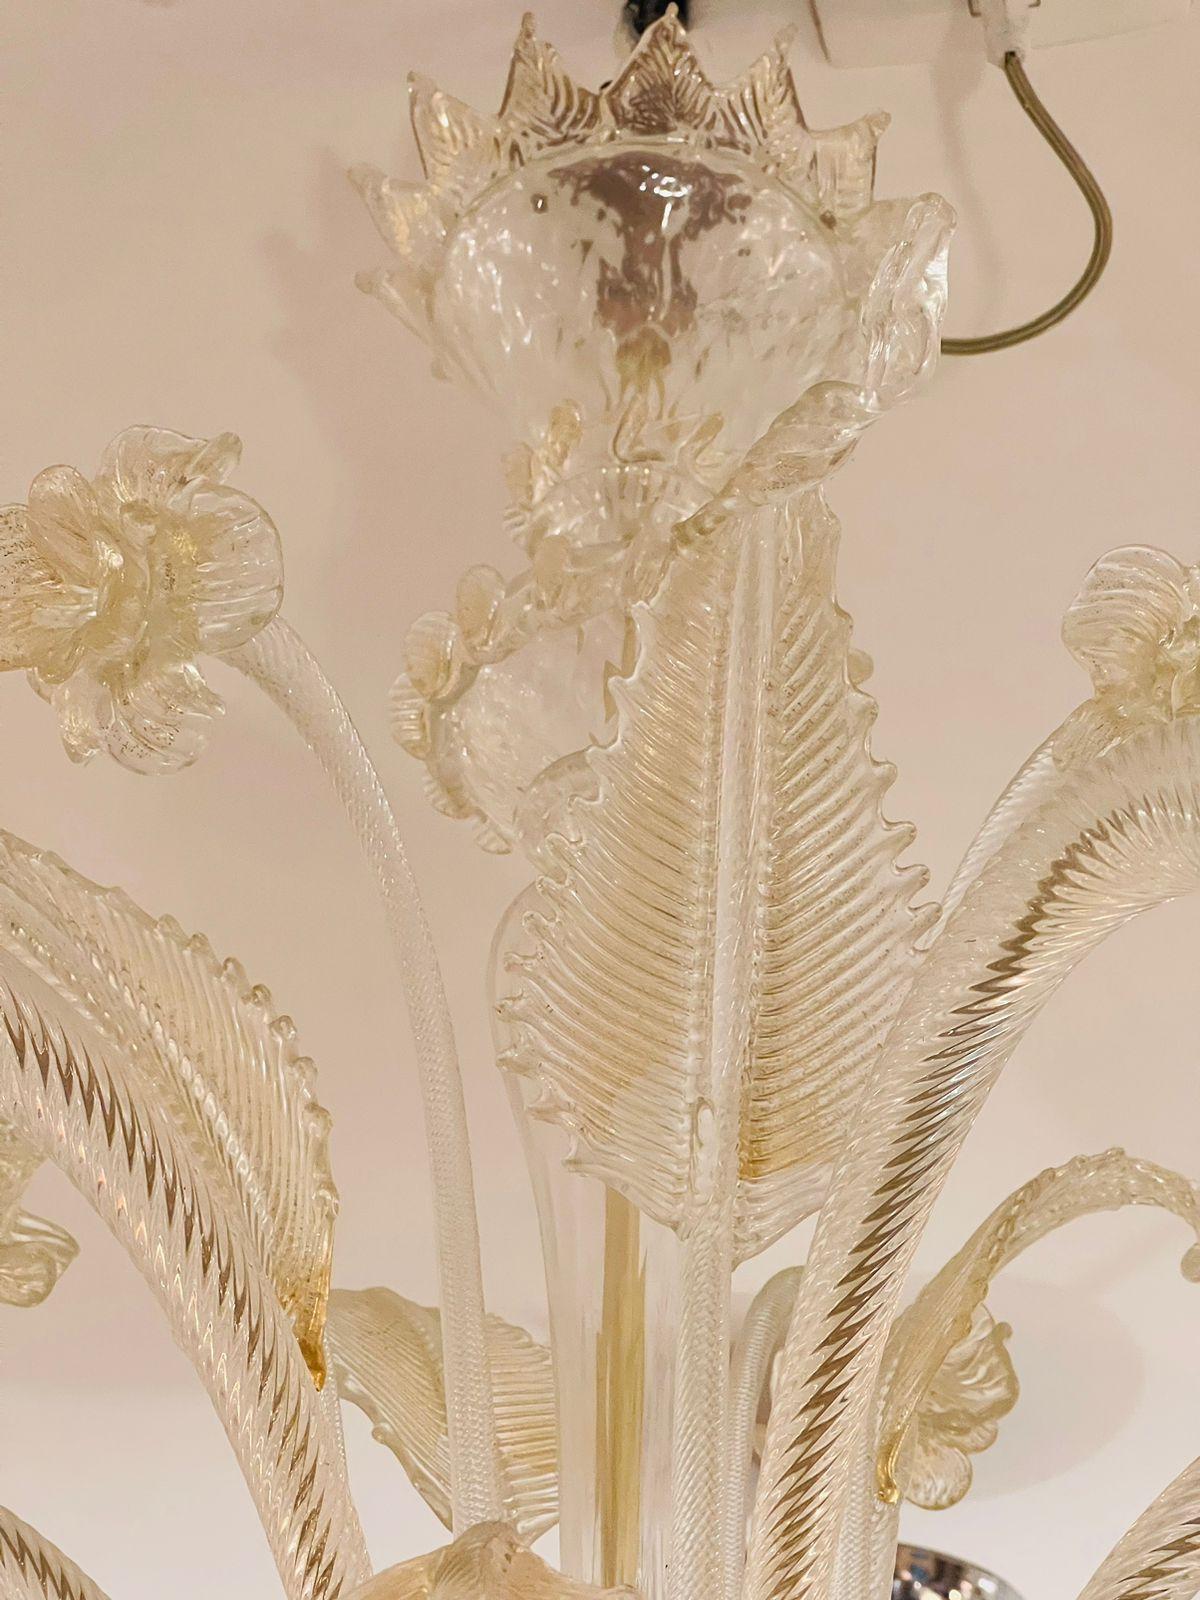 Incredible Barovier&Toso Murano glass Pair (2) chandeliers with gold and flowers circa 1950.